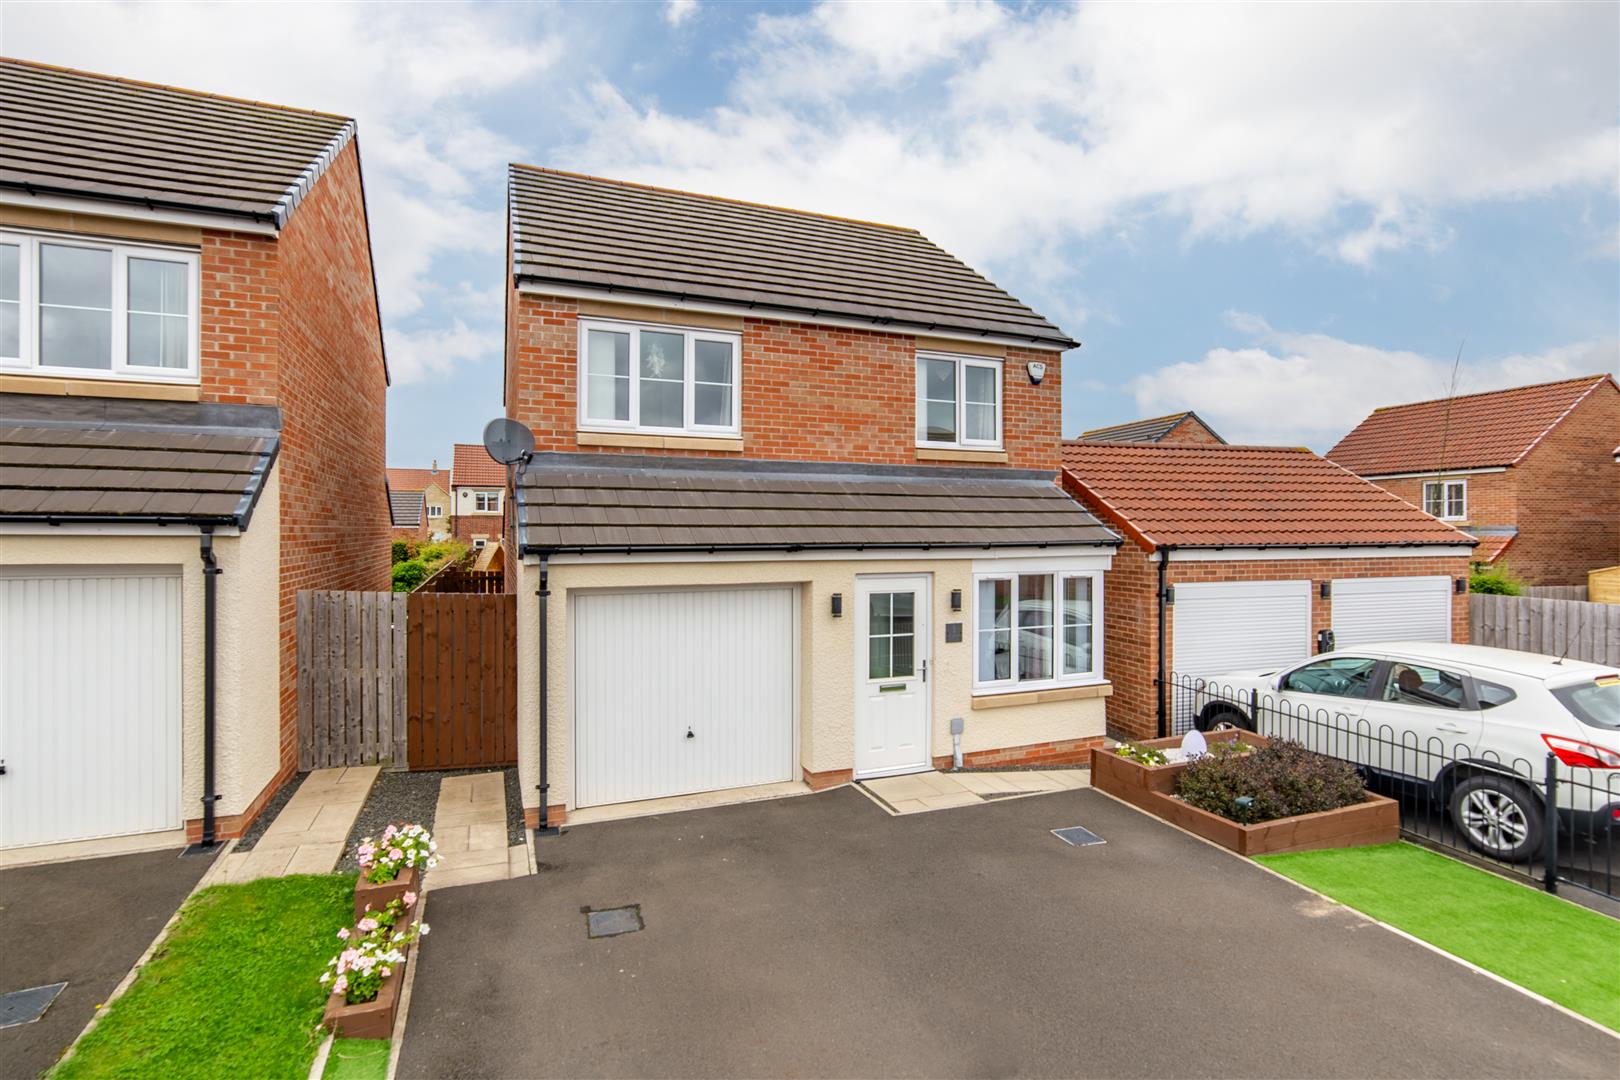 3 bed detached house for sale in Linnet Close, Wideopen - Property Image 1